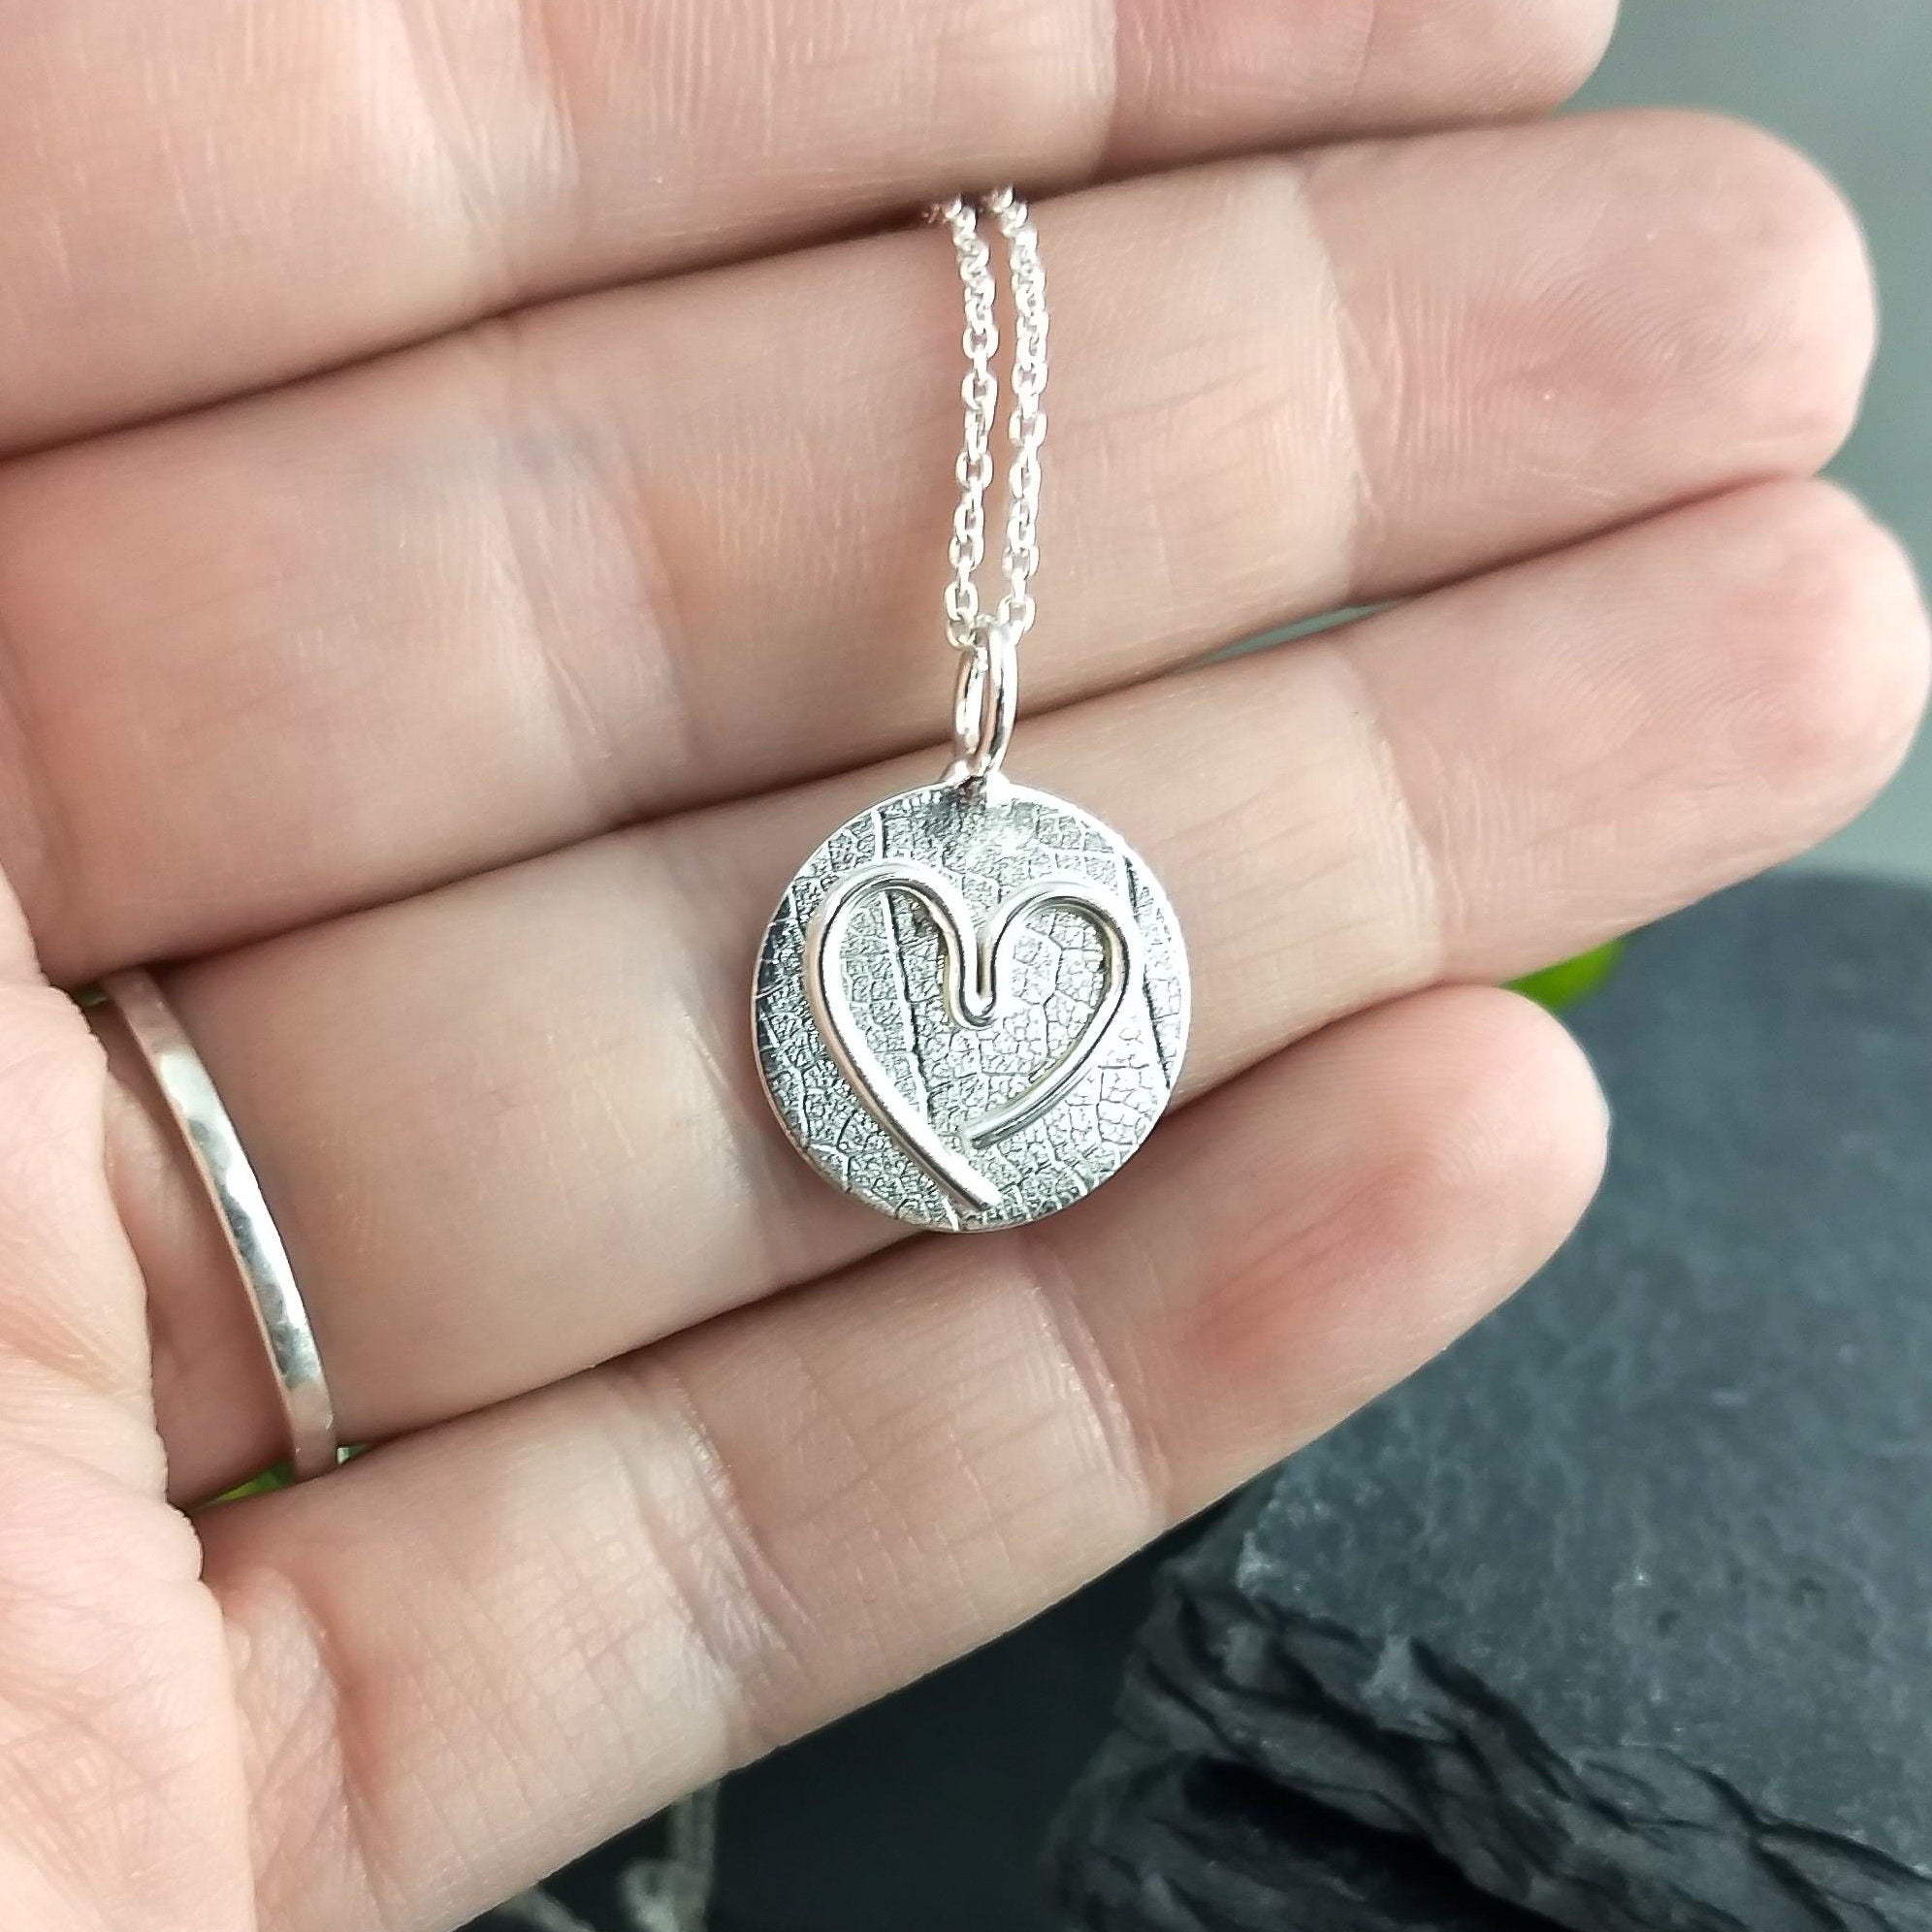 Child's heart pendant in sterling silver